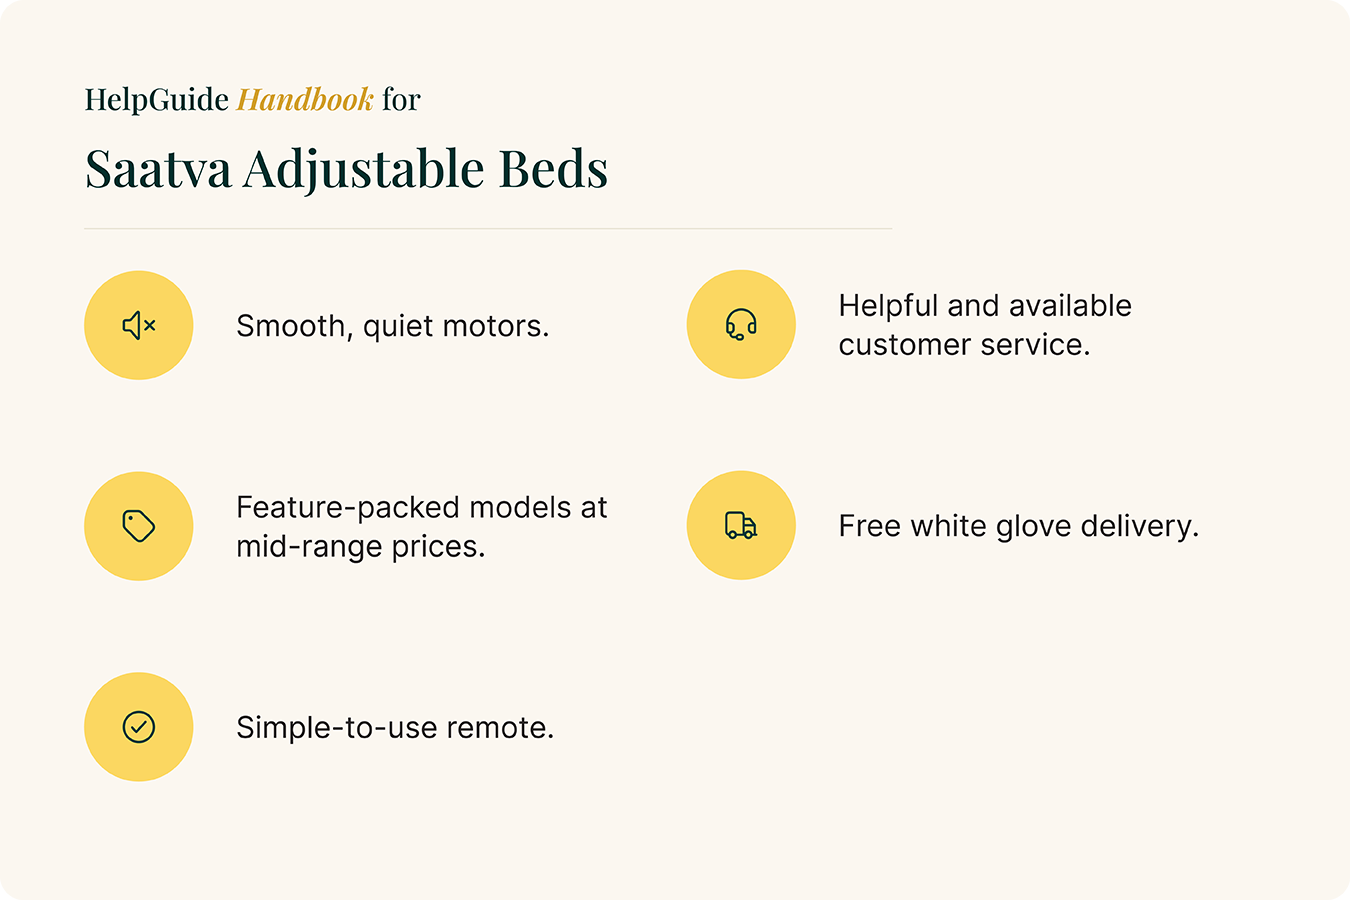 Top five takeaways from researching and testing Saatva adjustable beds